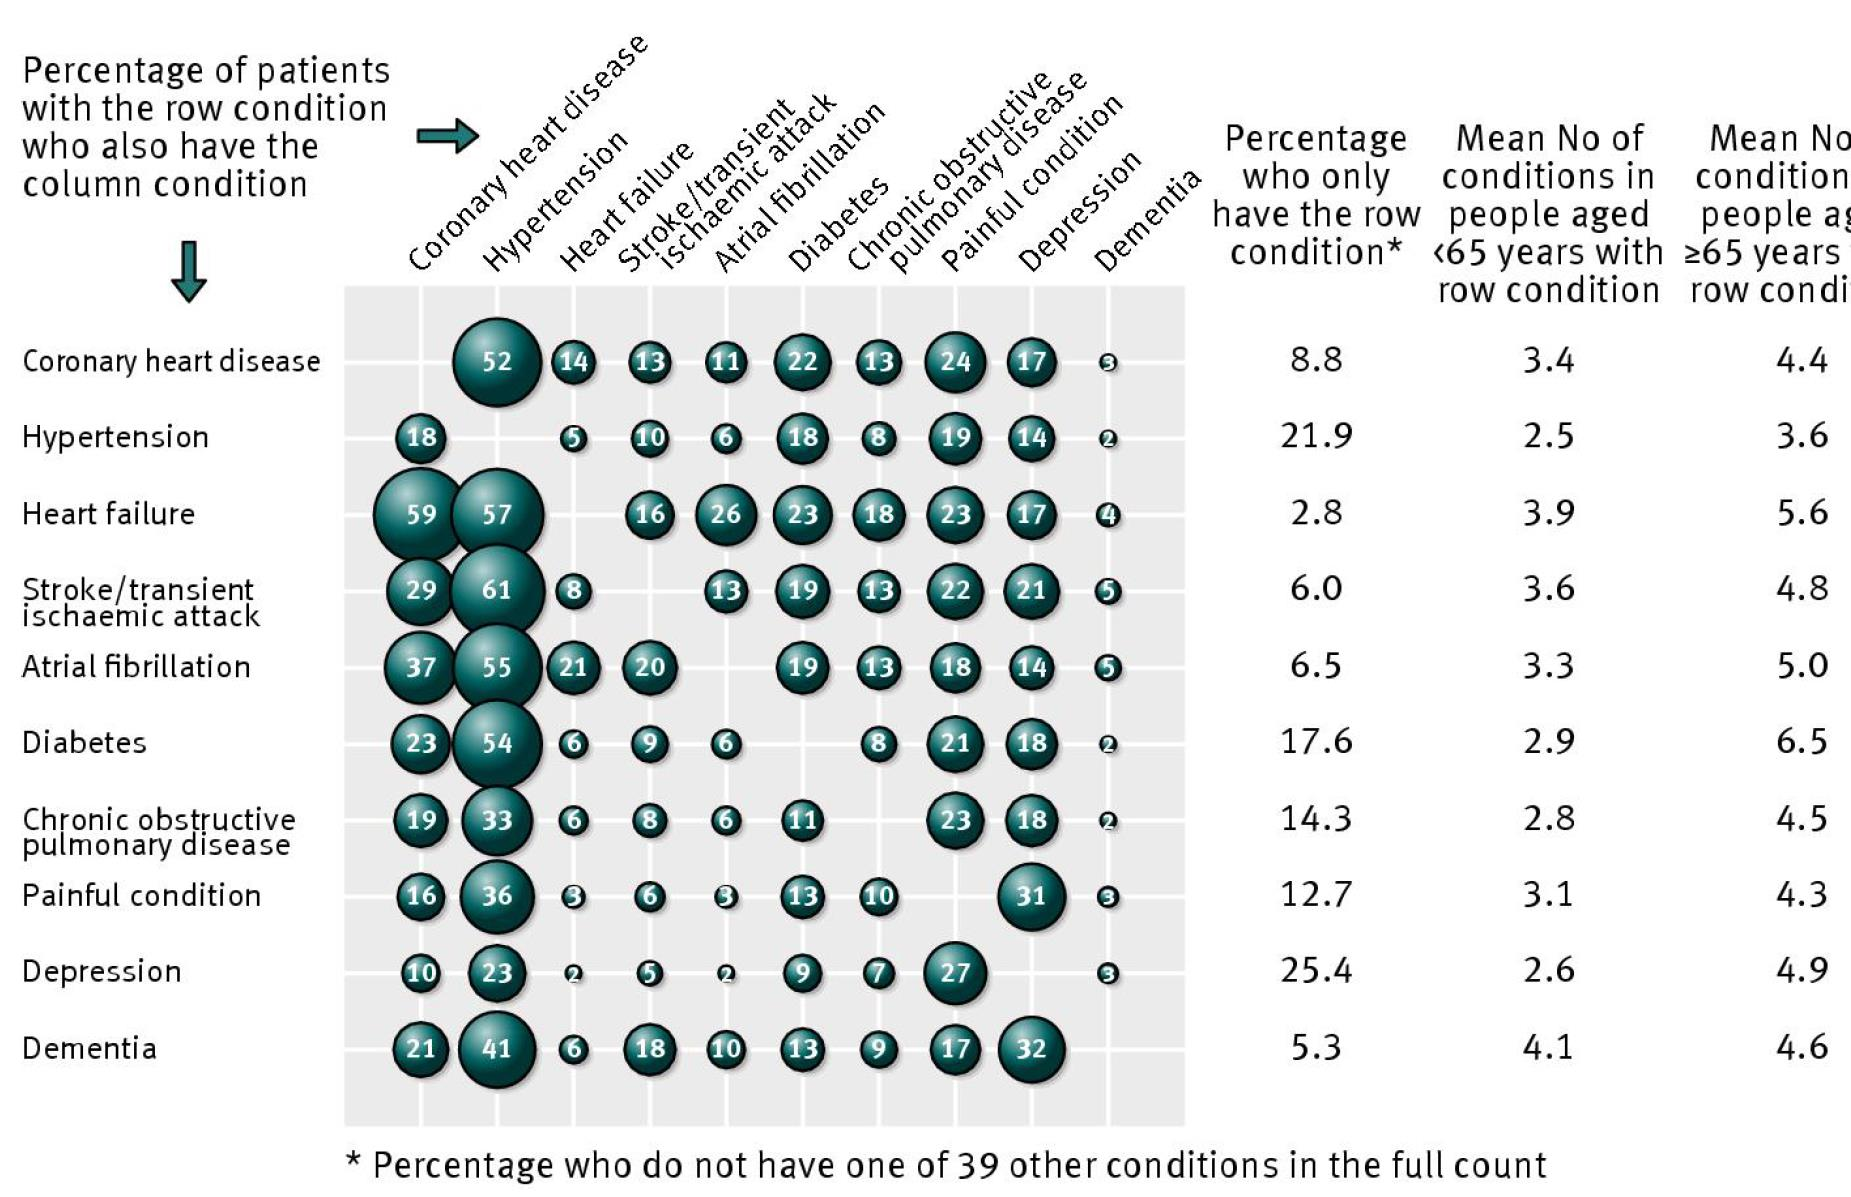 Comorbidity of 10 common conditions among UK primary care